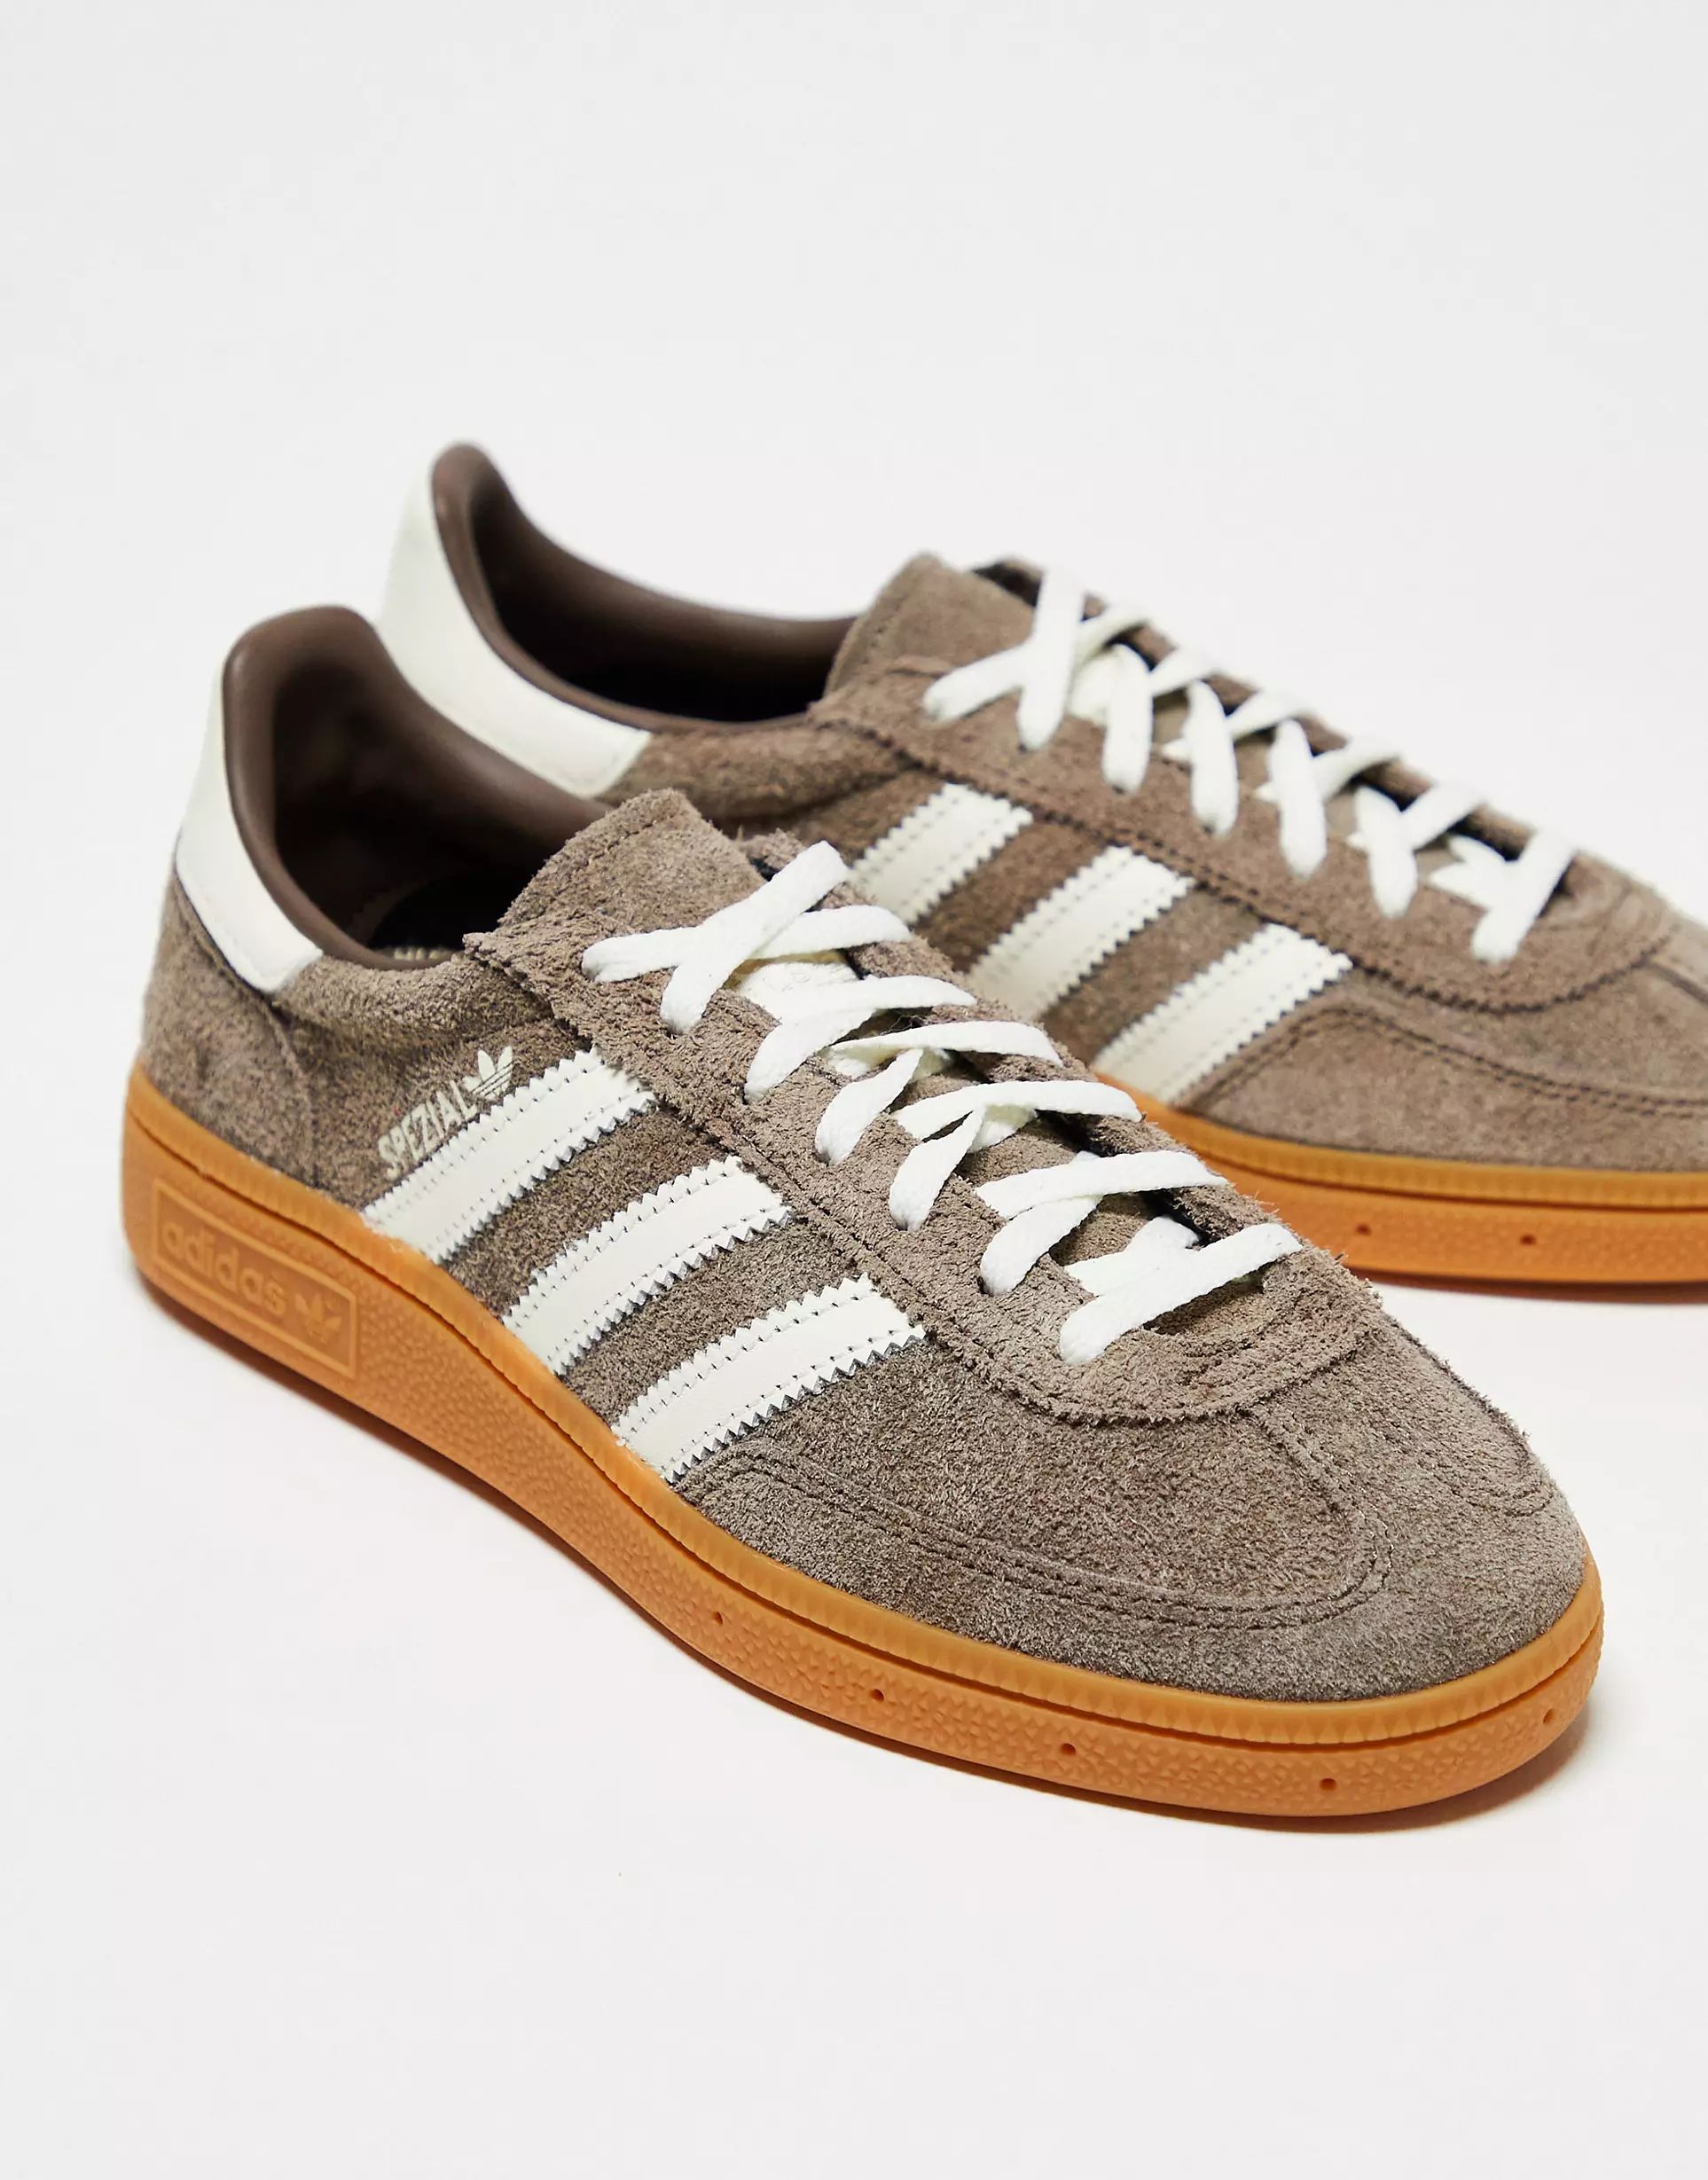 adidas Originals Handball Spezial gum sole trainers in brown and white | ASOS (Global)